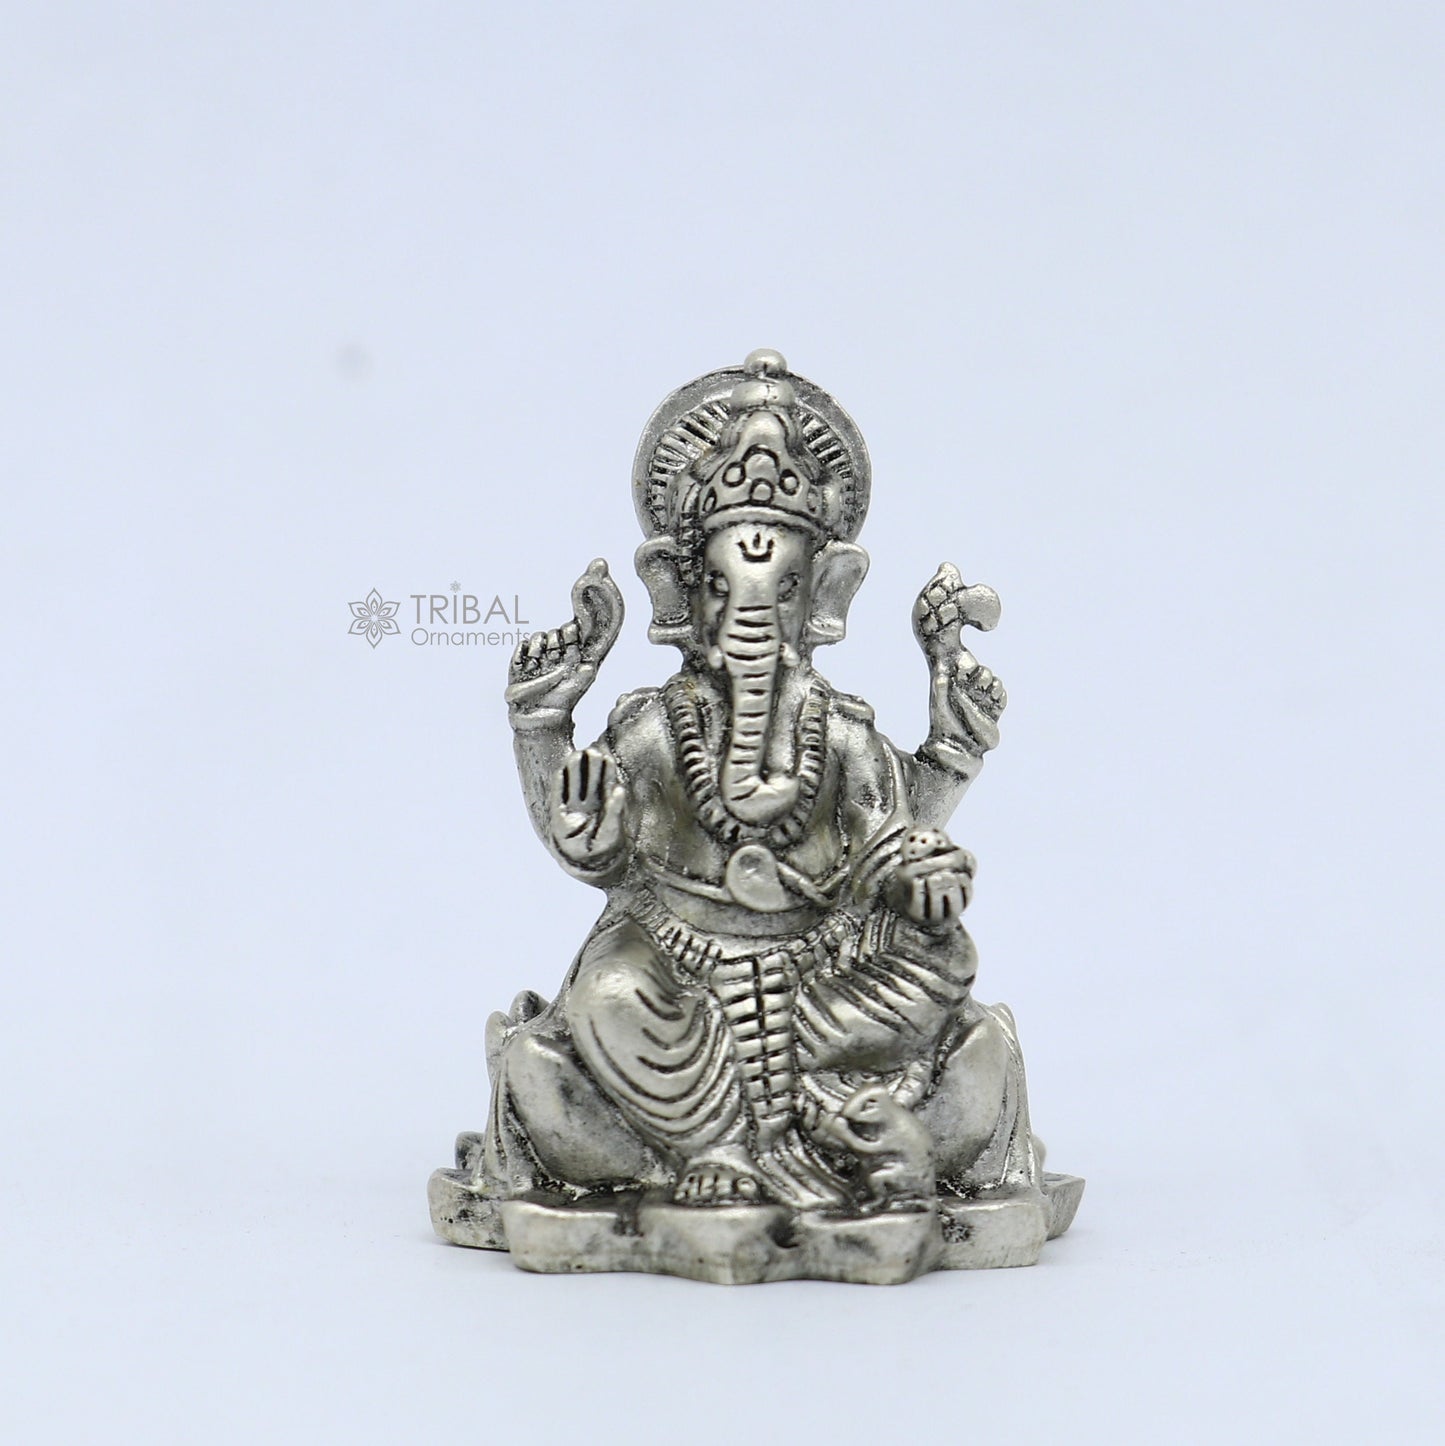 925 Sterling silver Divine lord idol Ganesha statue art, best puja figurine for home temple for wealth and prosperity art730 - TRIBAL ORNAMENTS